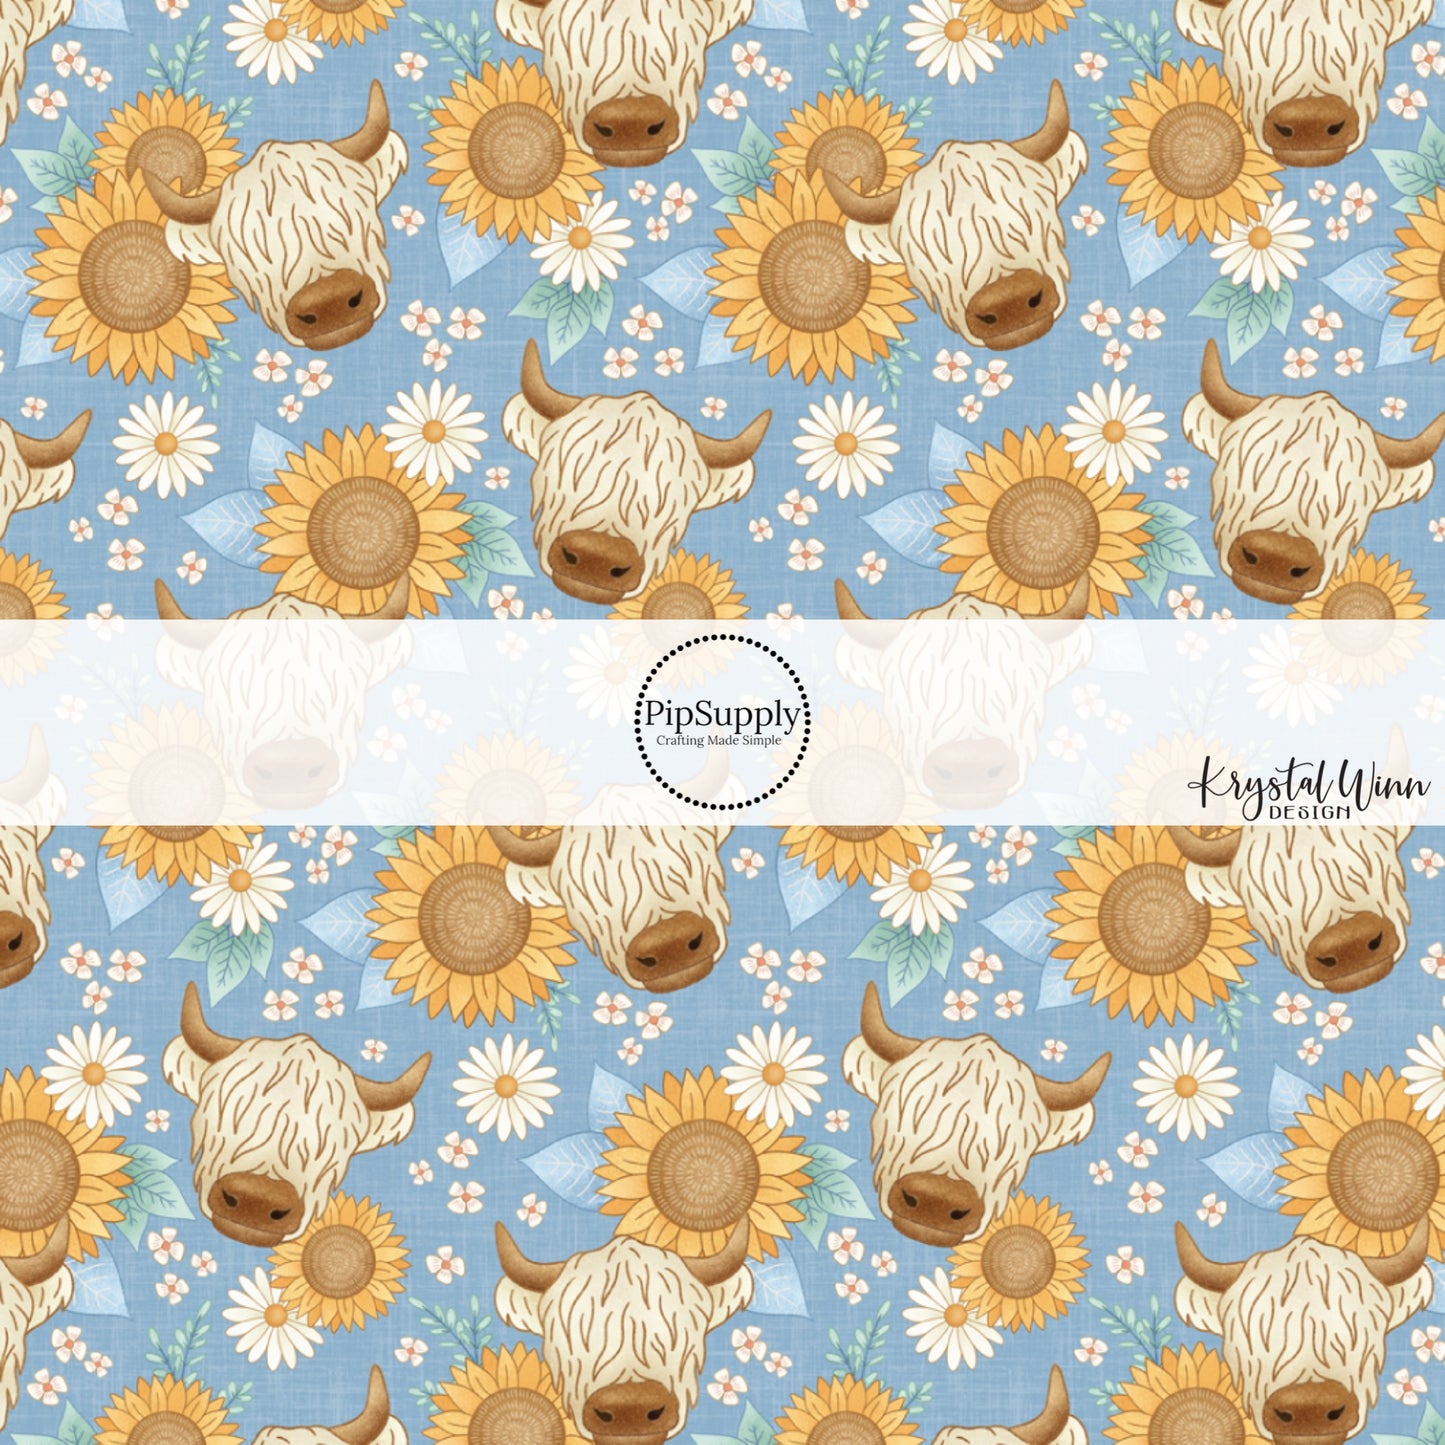 This summer fabric by the yard features highland cows and sunflowers. This fun summer themed fabric can be used for all your sewing and crafting needs!